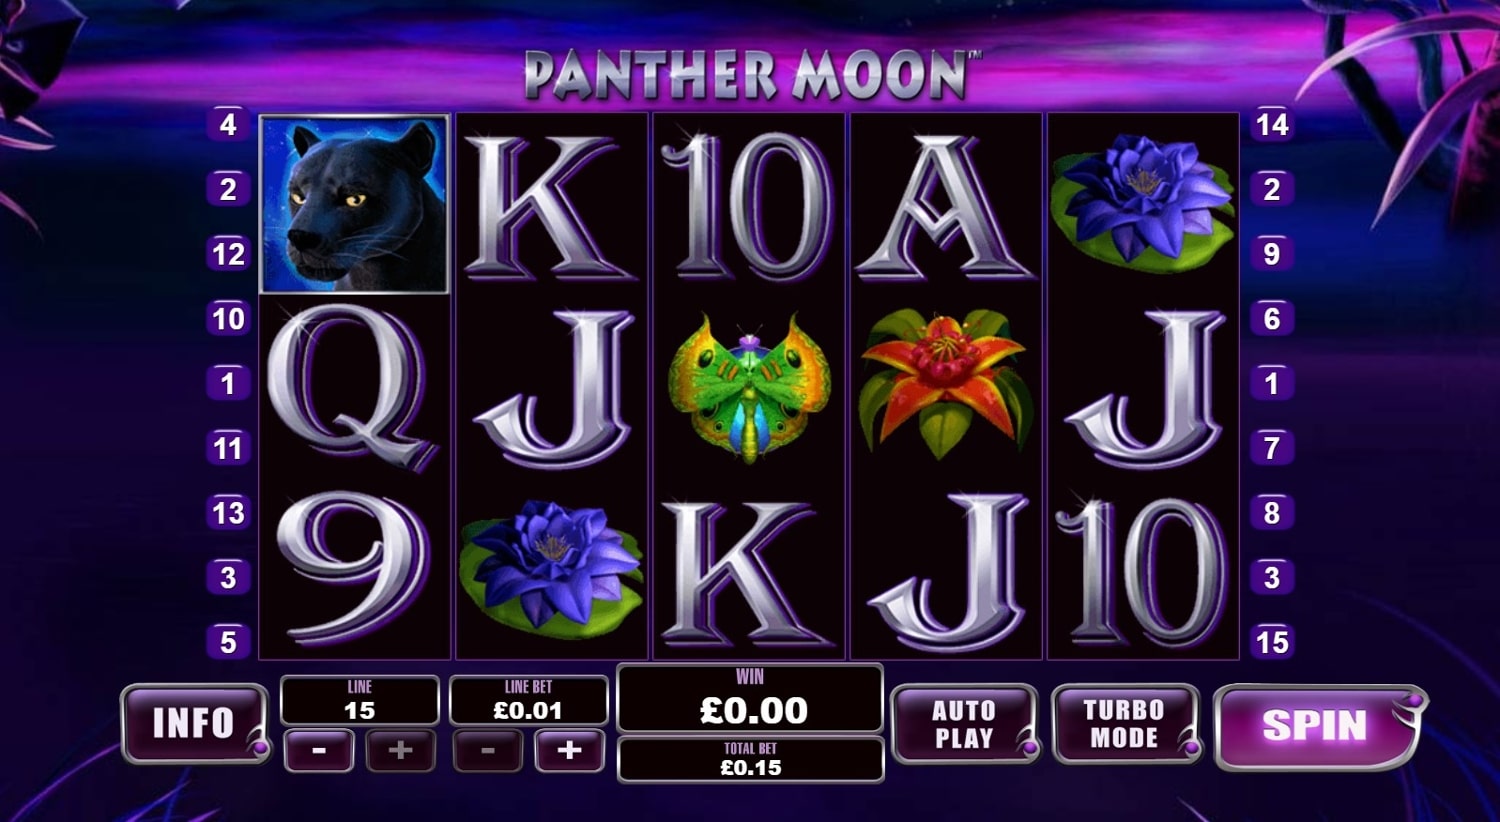 Panther Moon Free Spins